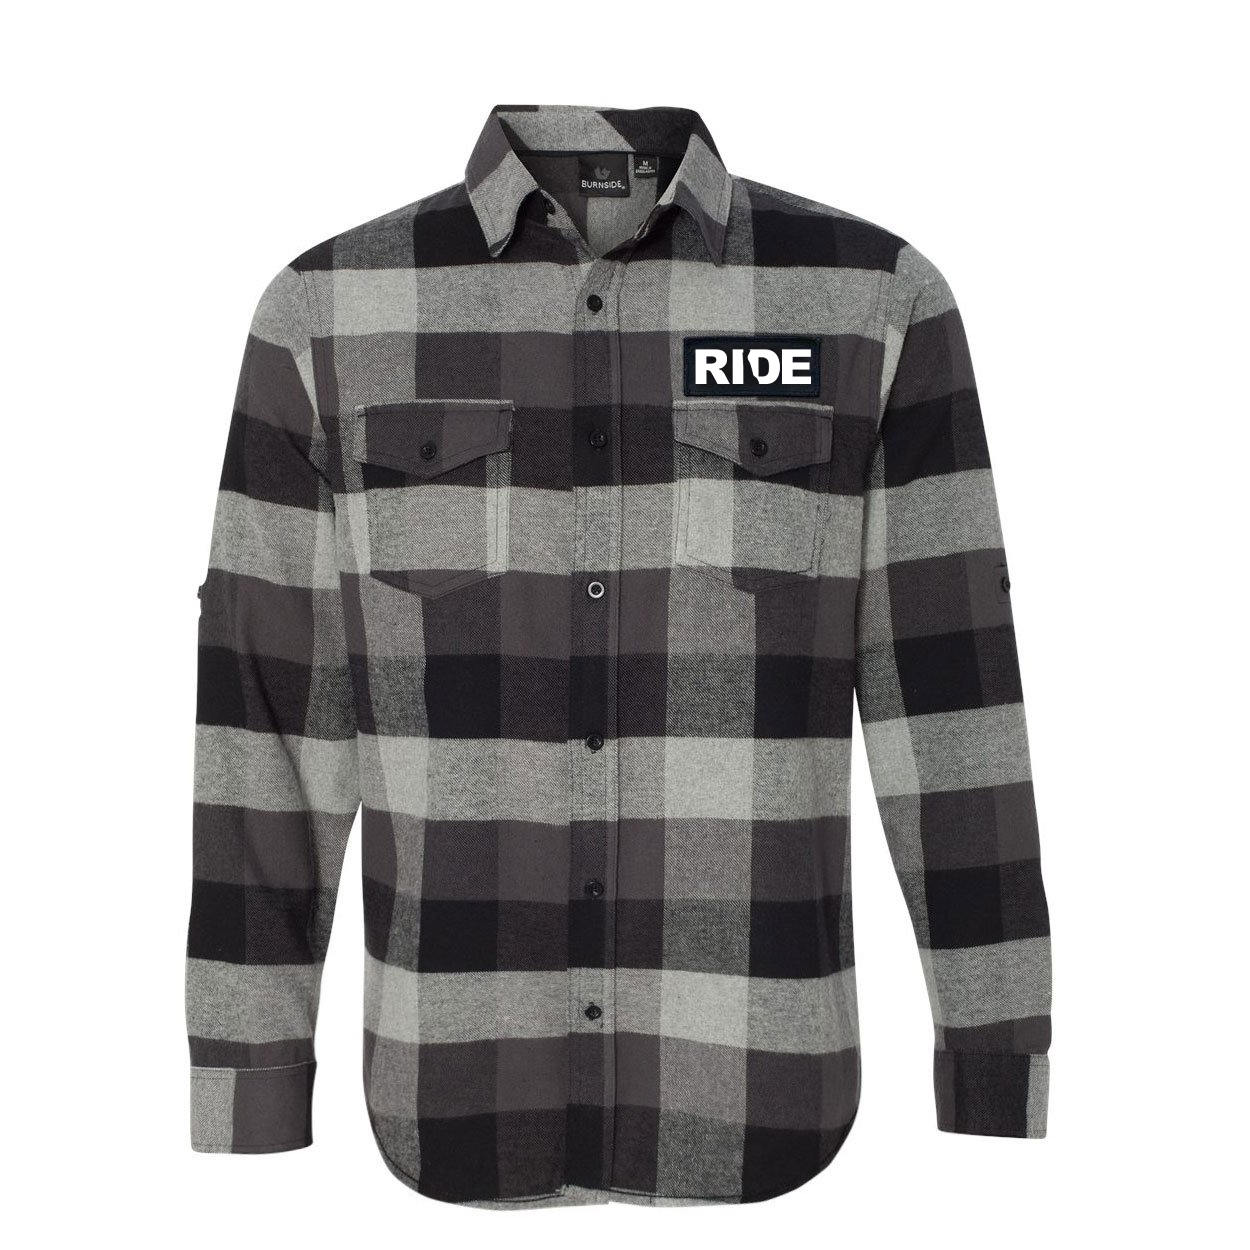 Ride Delaware Classic Unisex Long Sleeve Woven Patch Flannel Shirt Black/Gray (White Logo)